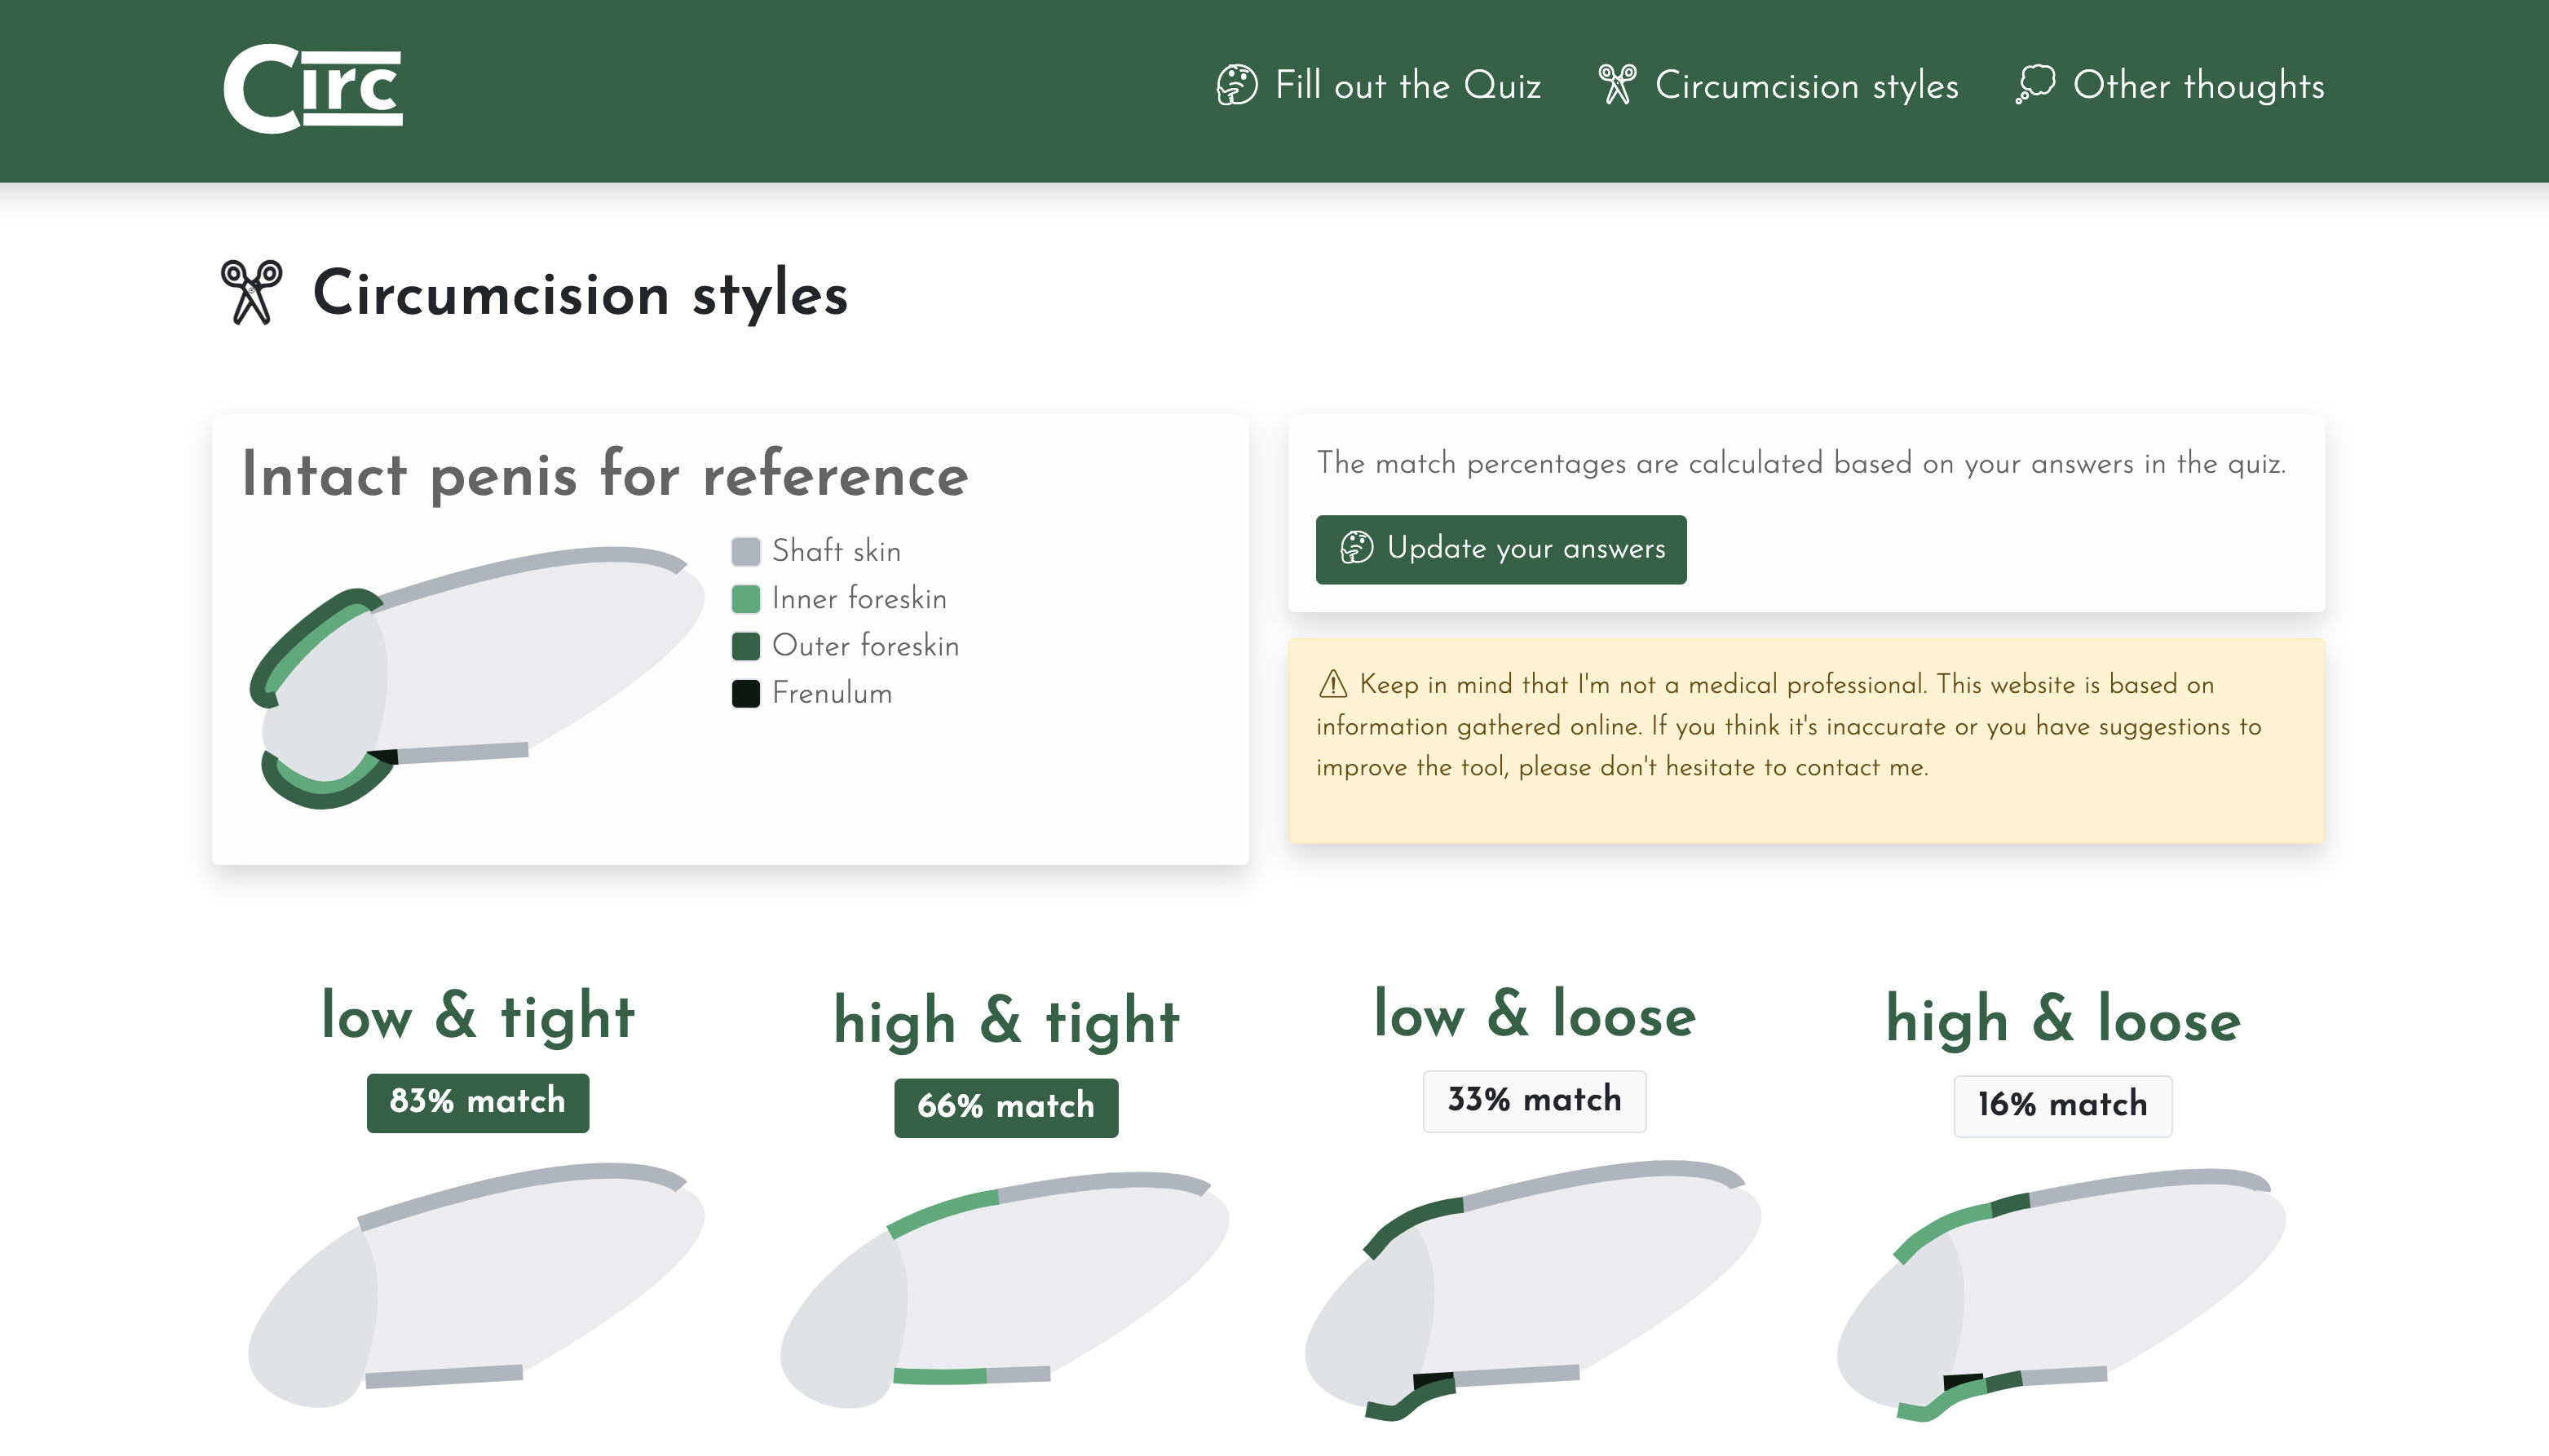 Screenshot of the “Circumcision styles” page